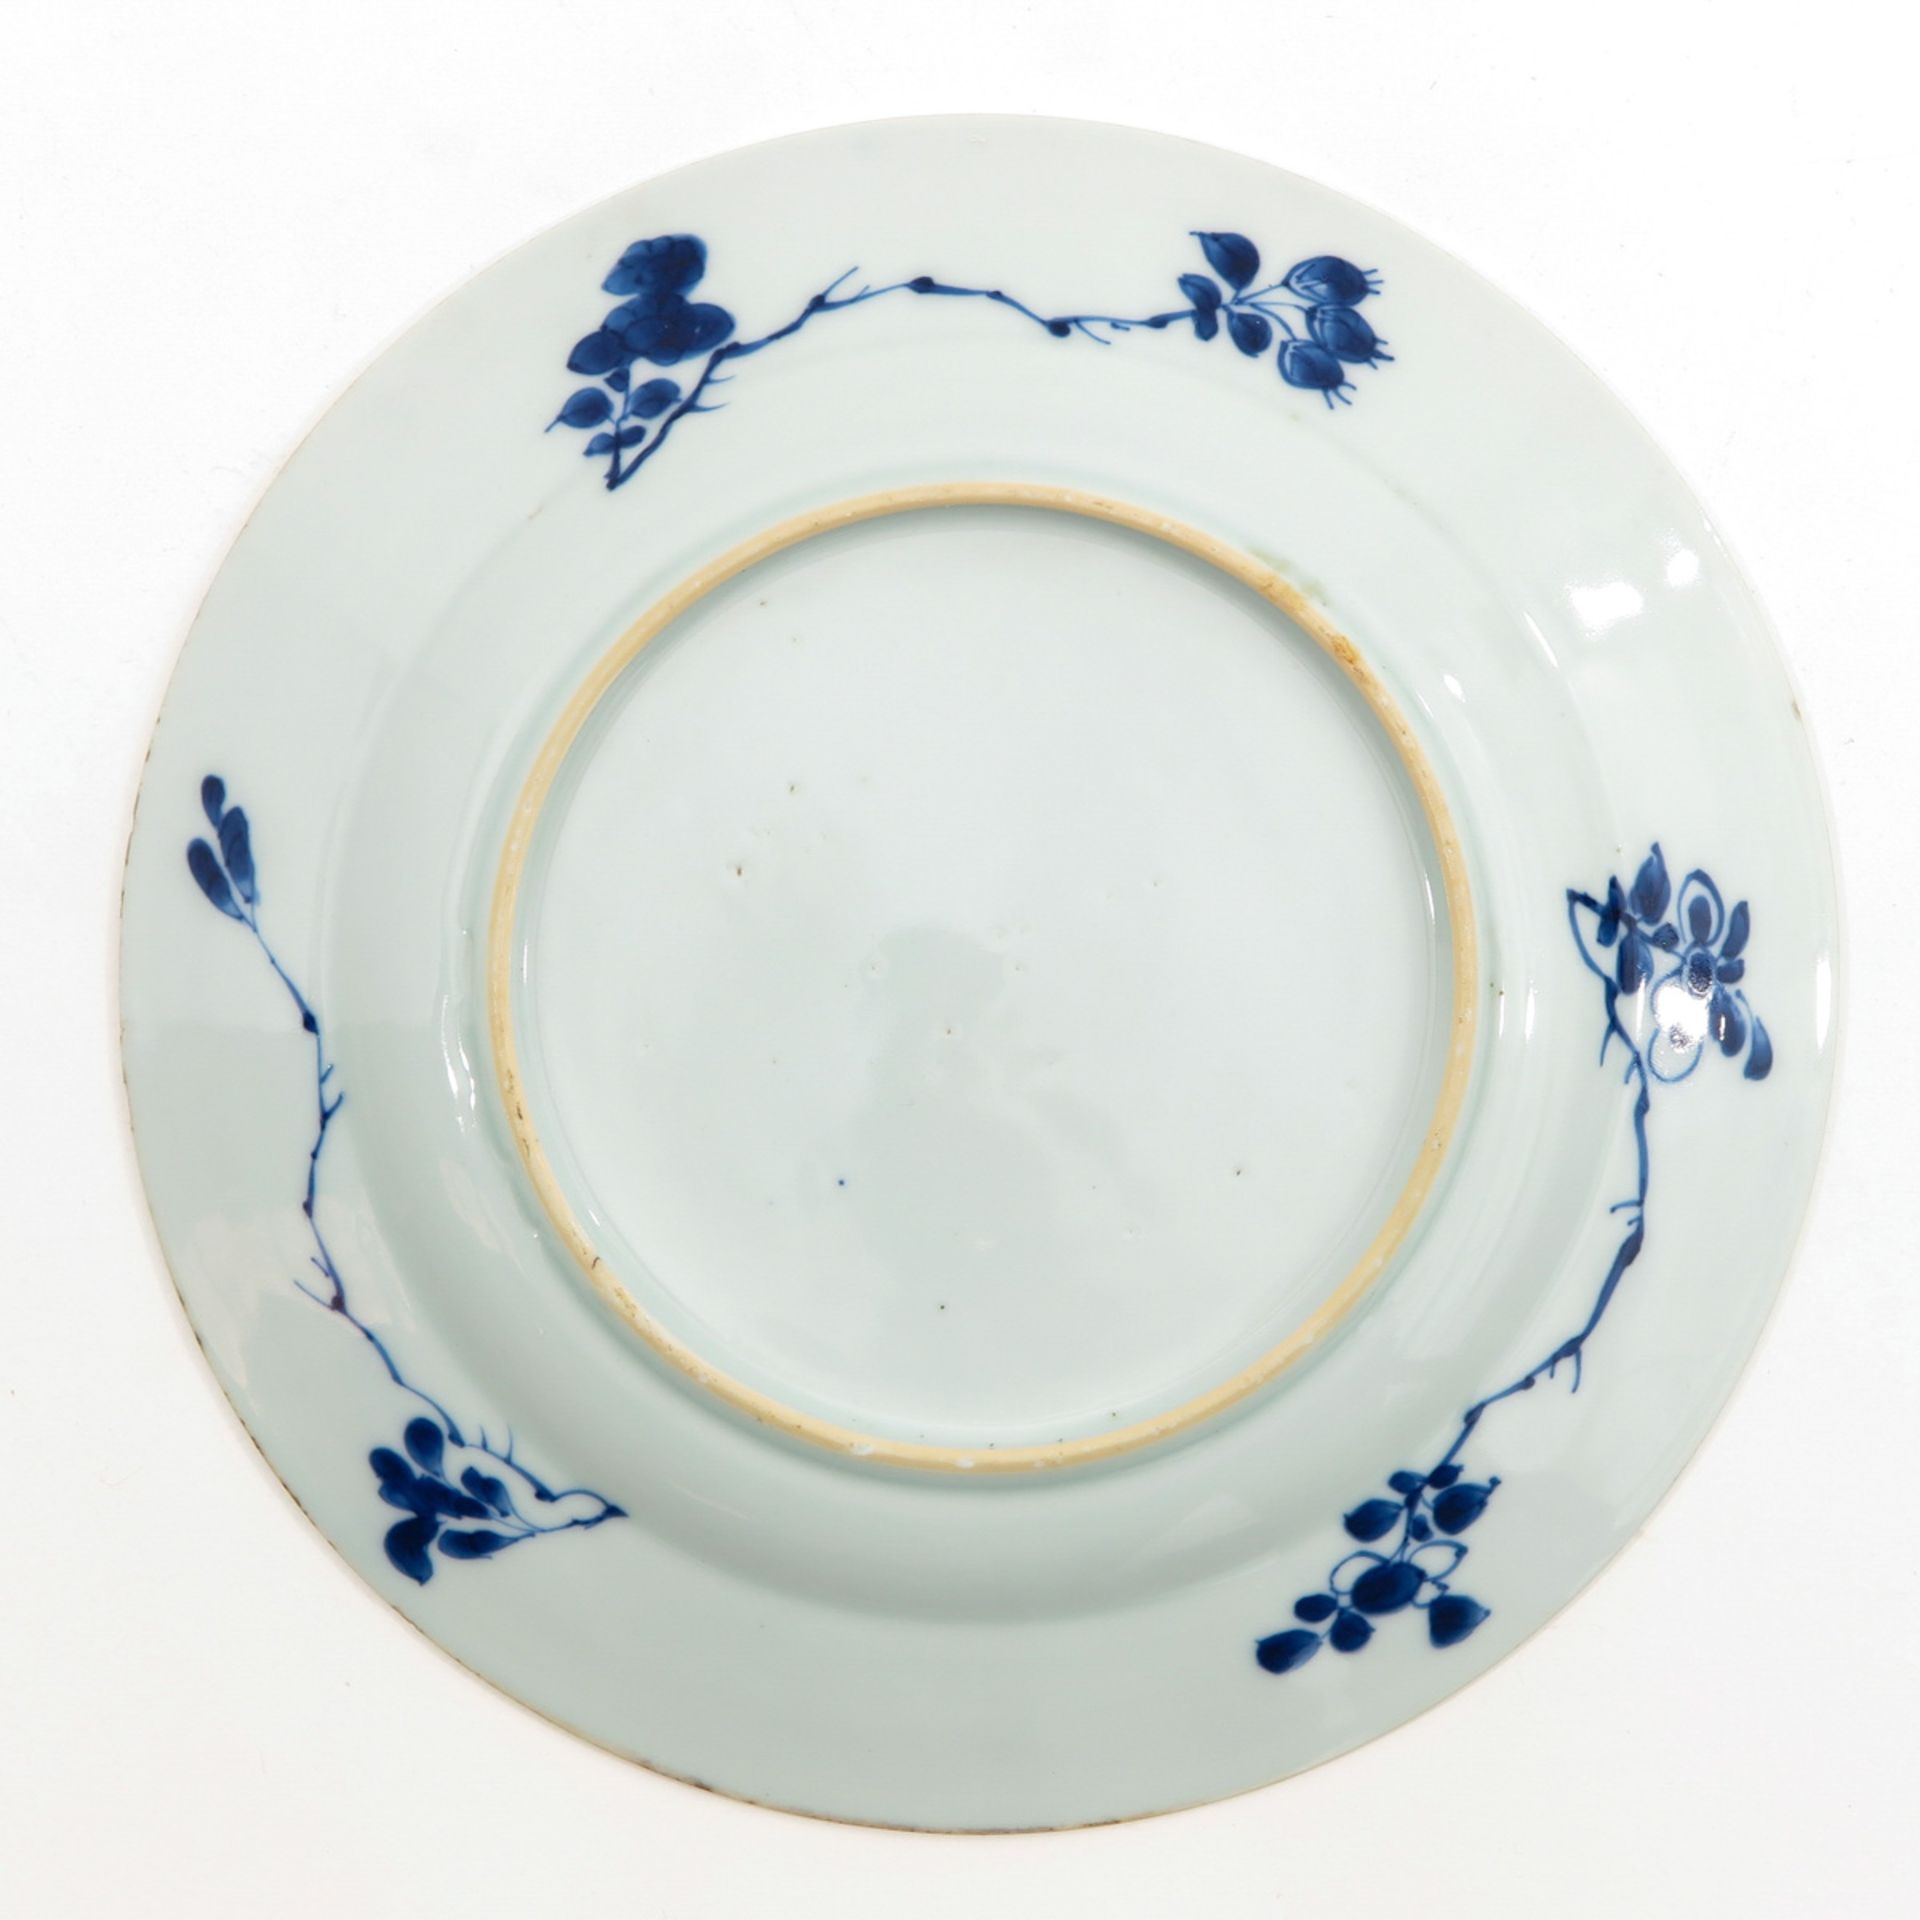 A Series of 3 Blue and White Plates - Image 4 of 10